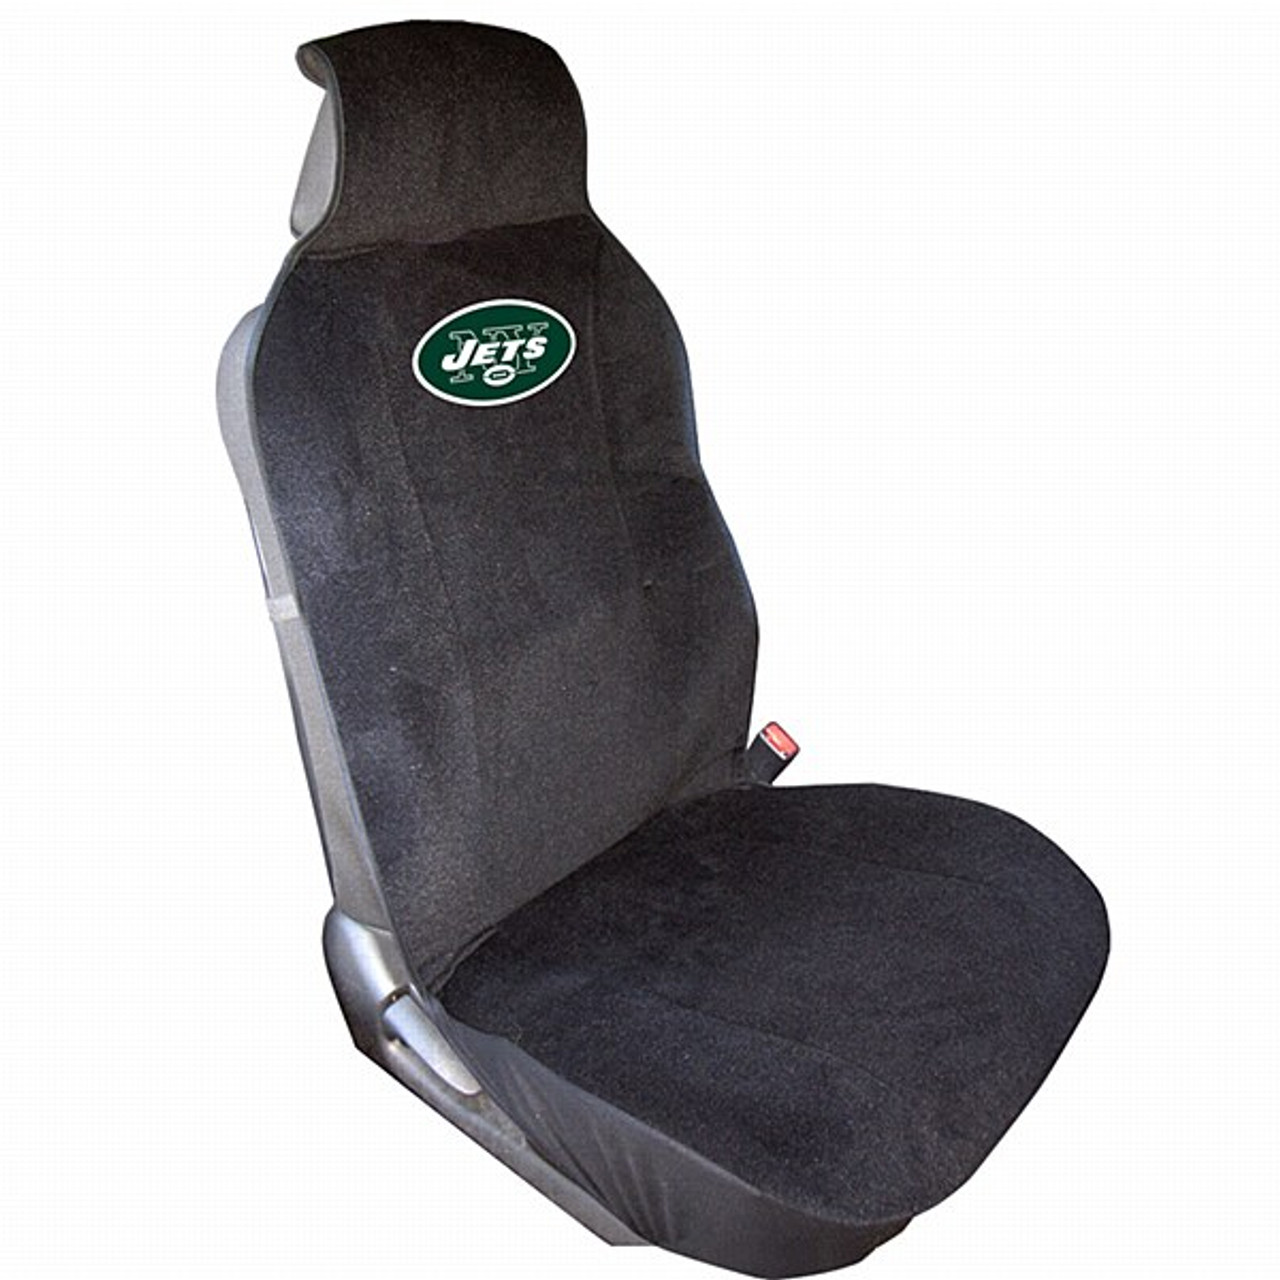 Fremont Die New York Jets Seat Cover CO